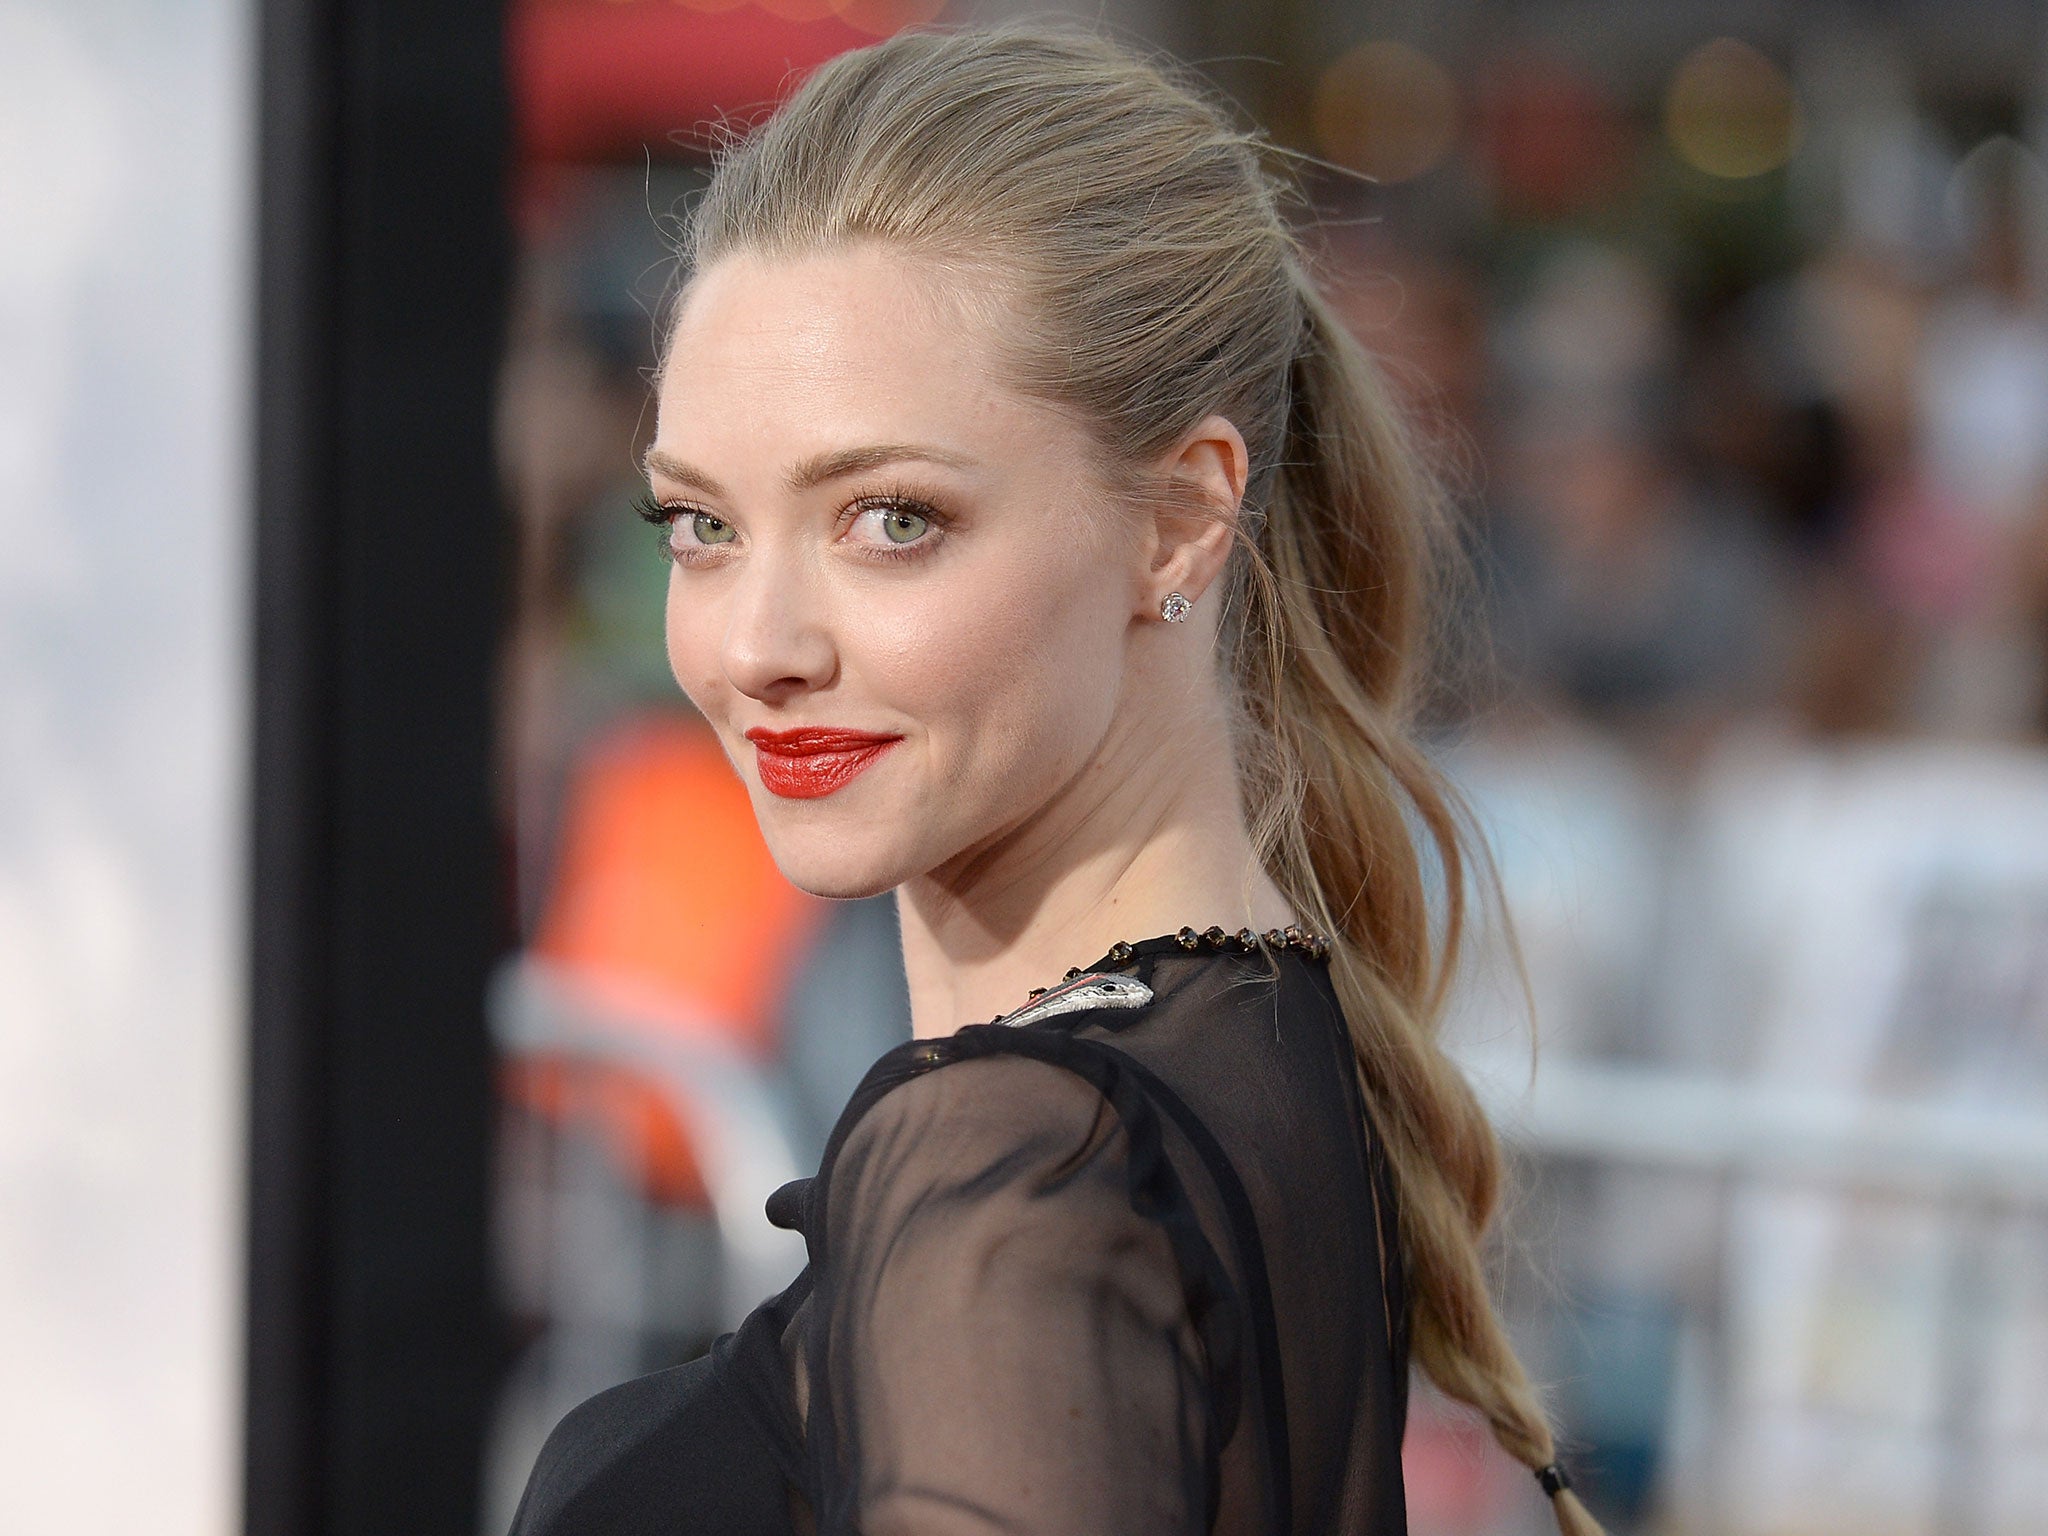 Amanda Seyfried says she ‘still has nightmares’ about her role in ’Les Misérables’